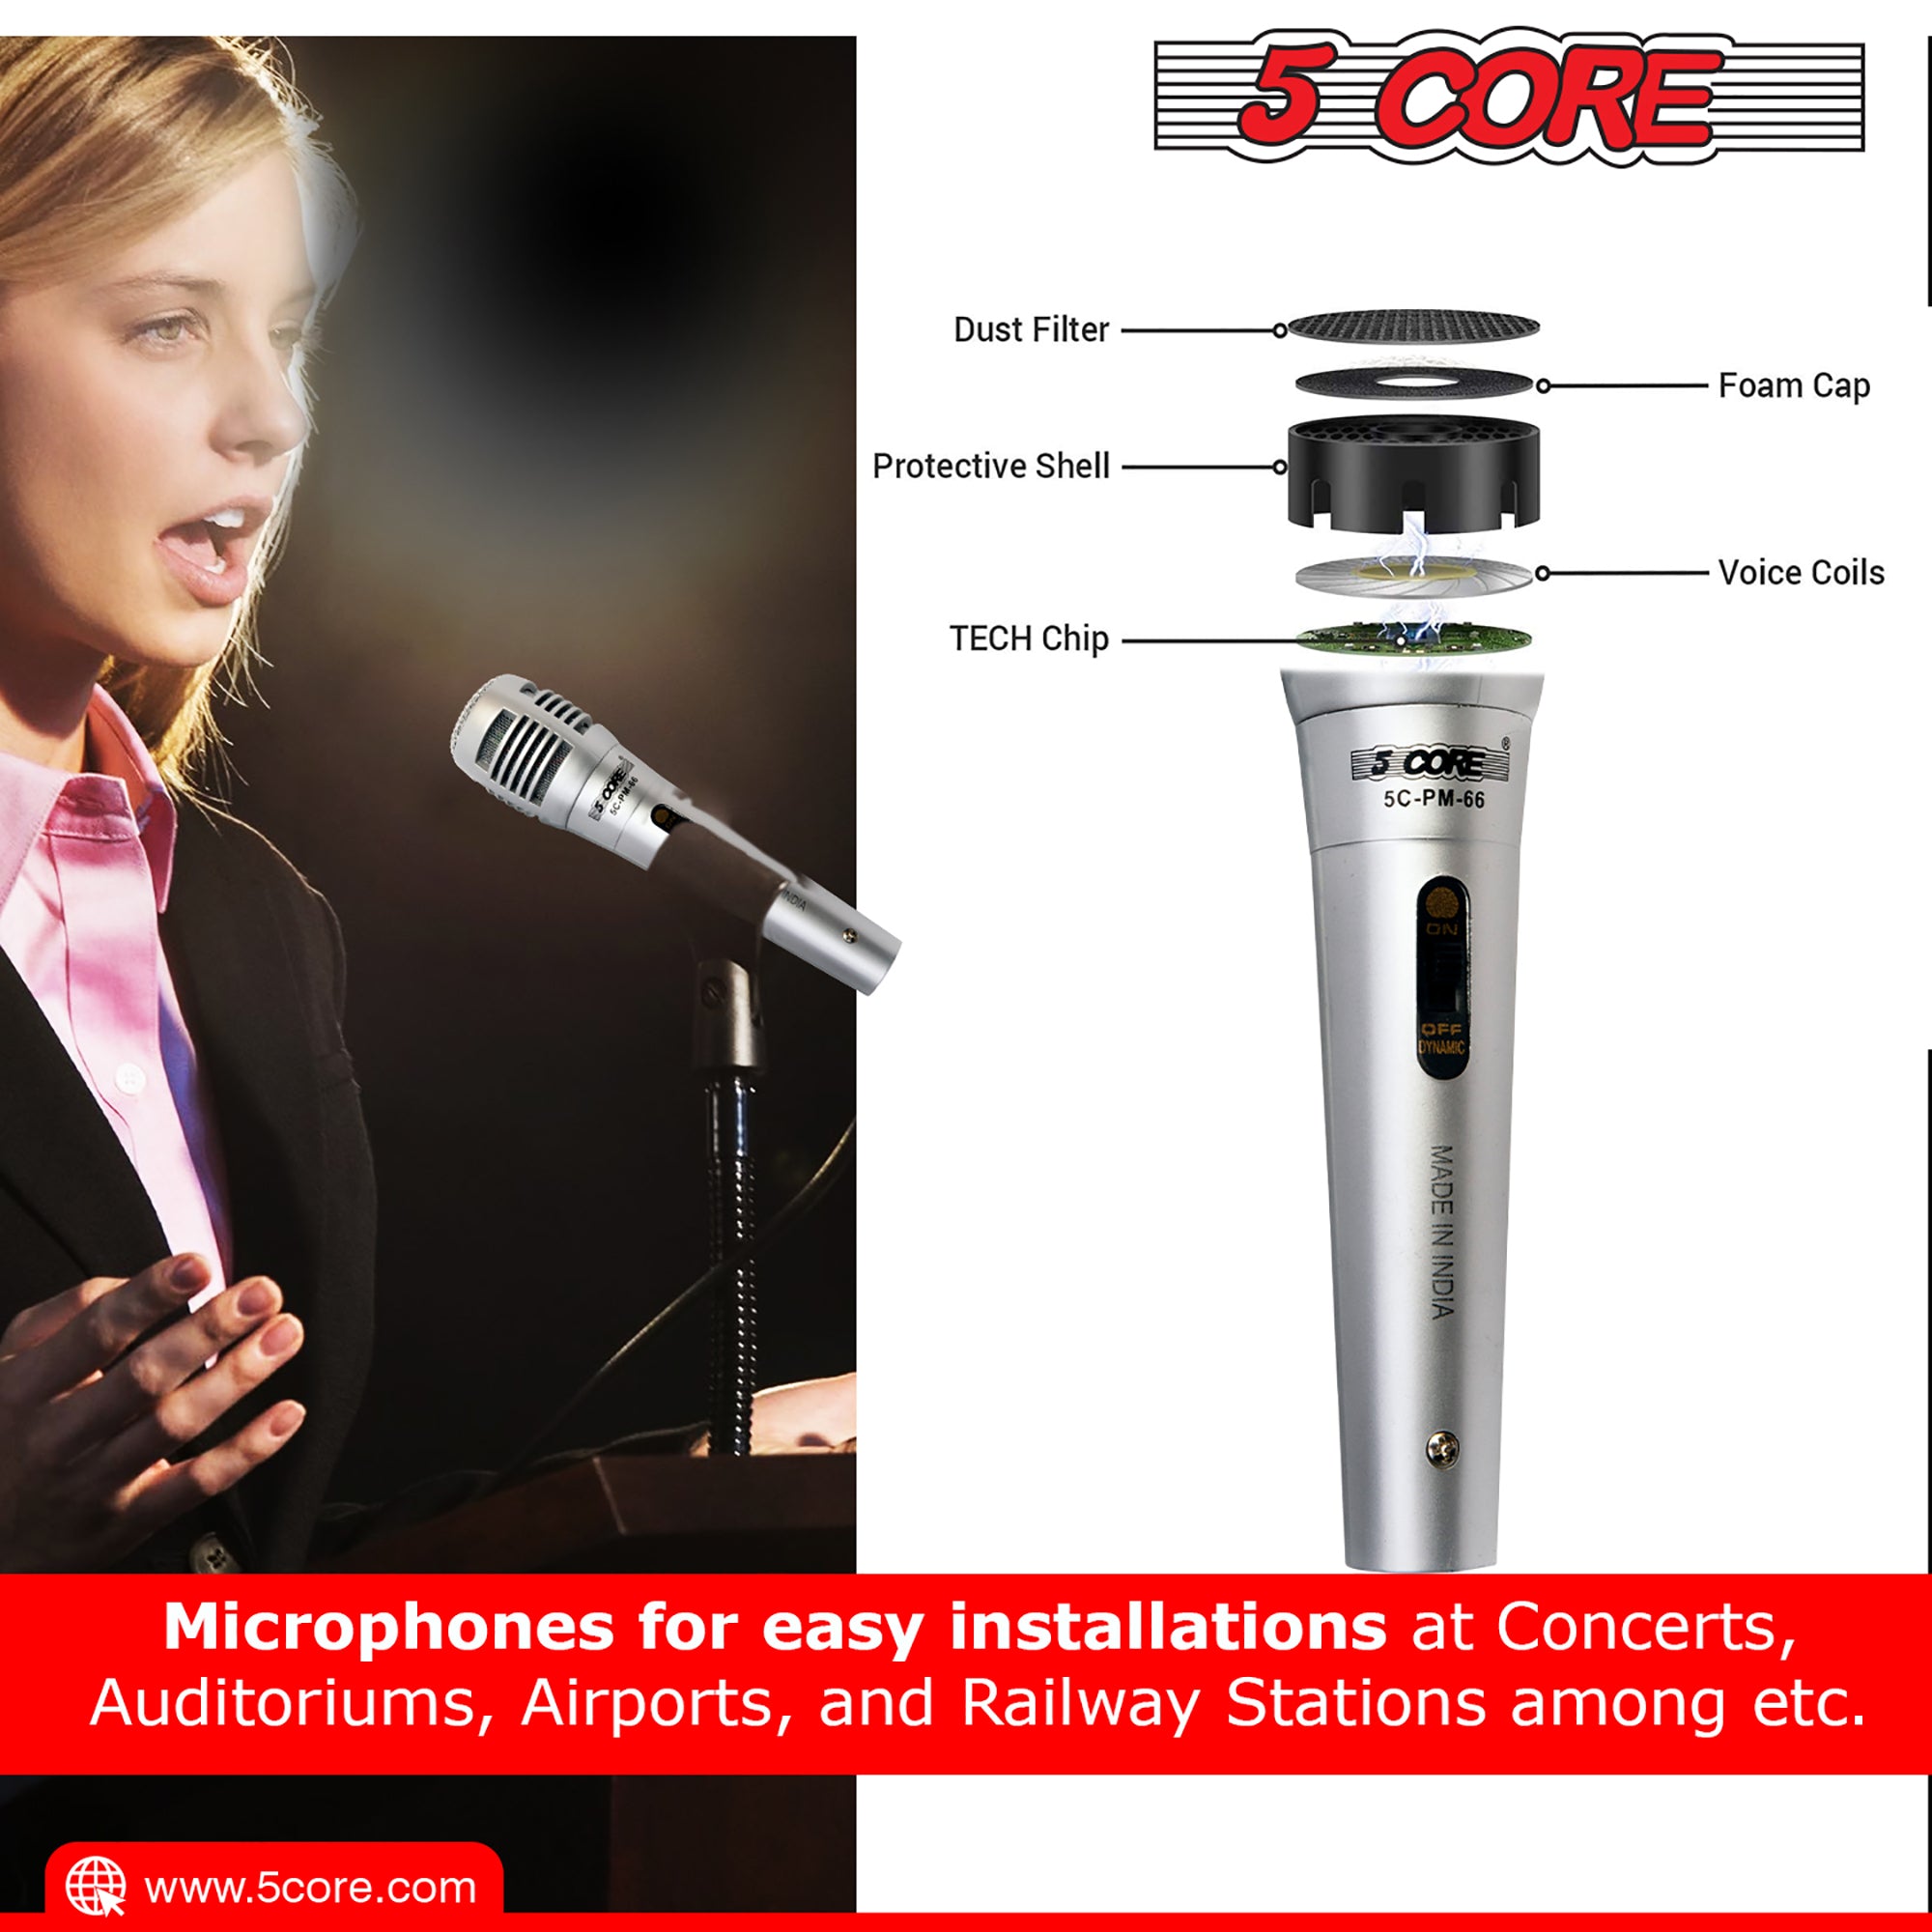 Singing in Harmony: Dynamic Microphones for Duet Performances